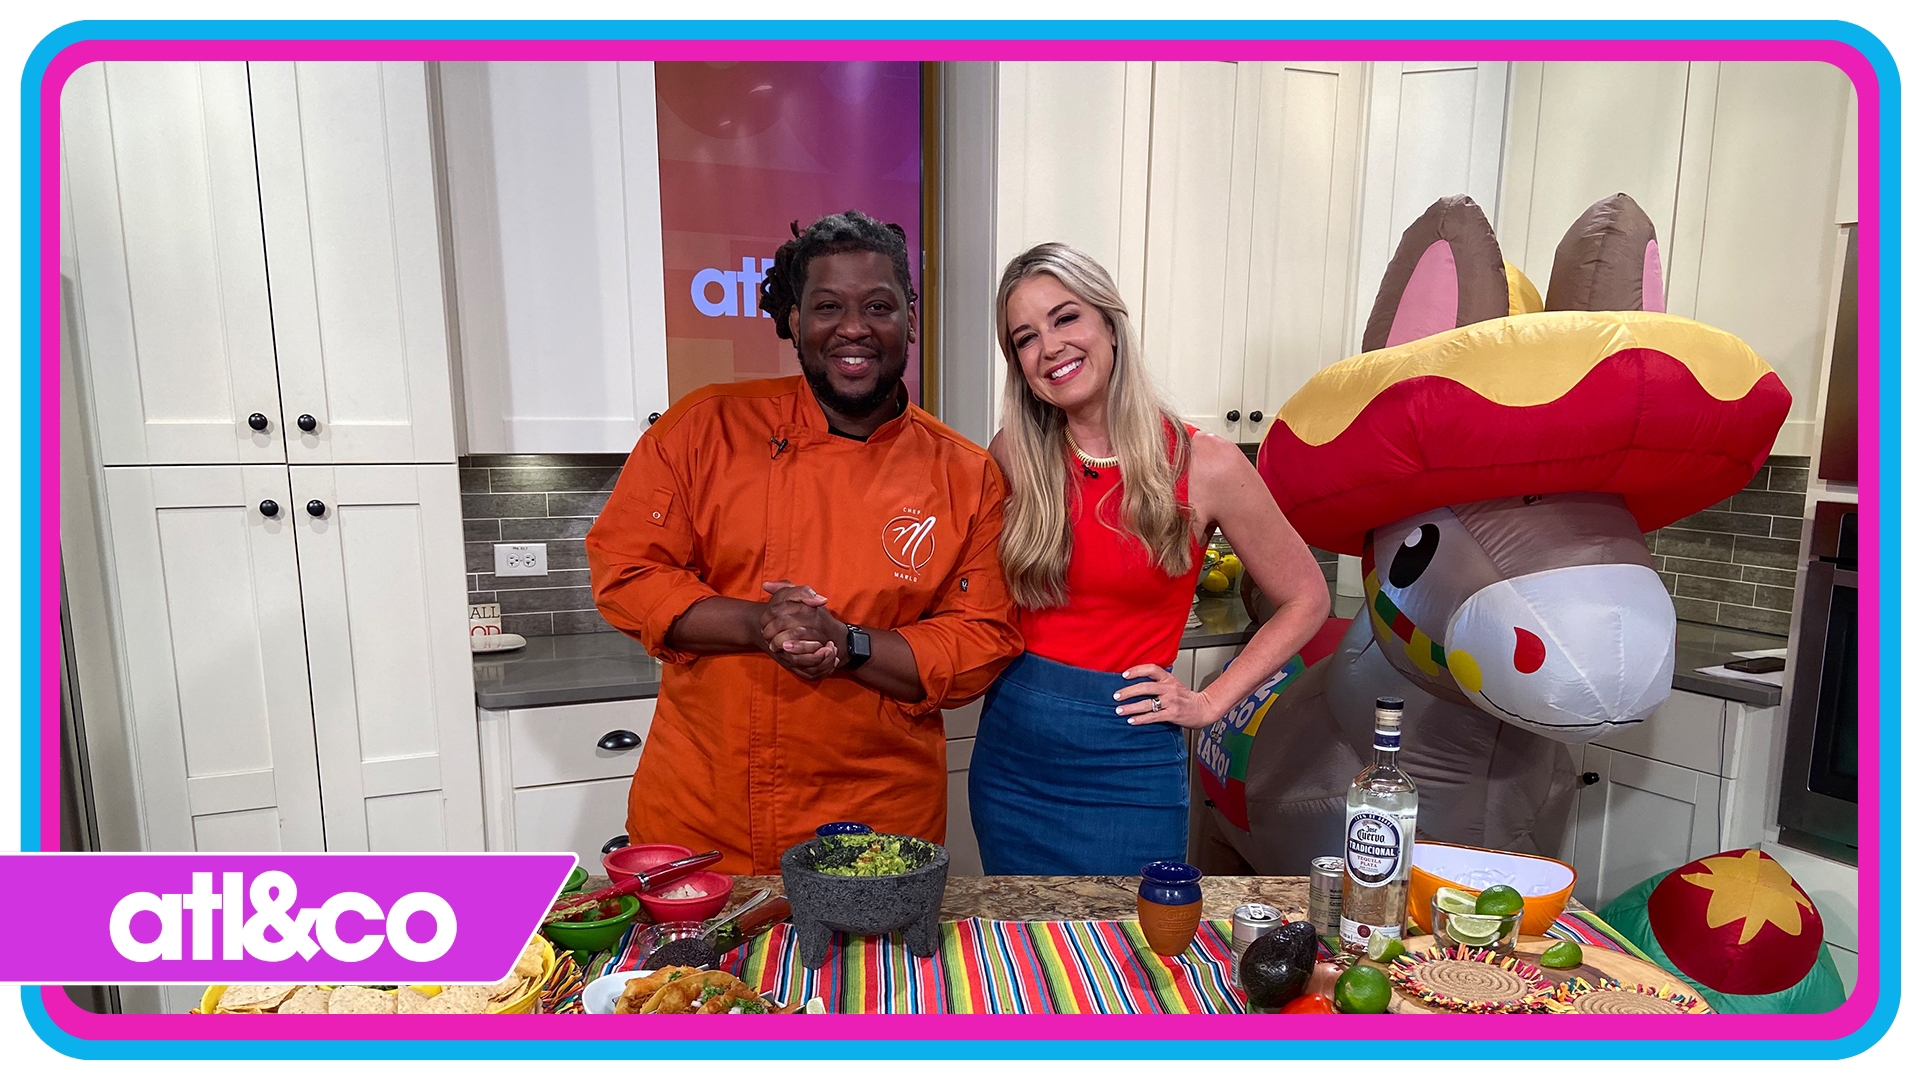 Chef Marlo shares recipes to spice up your celebrations.